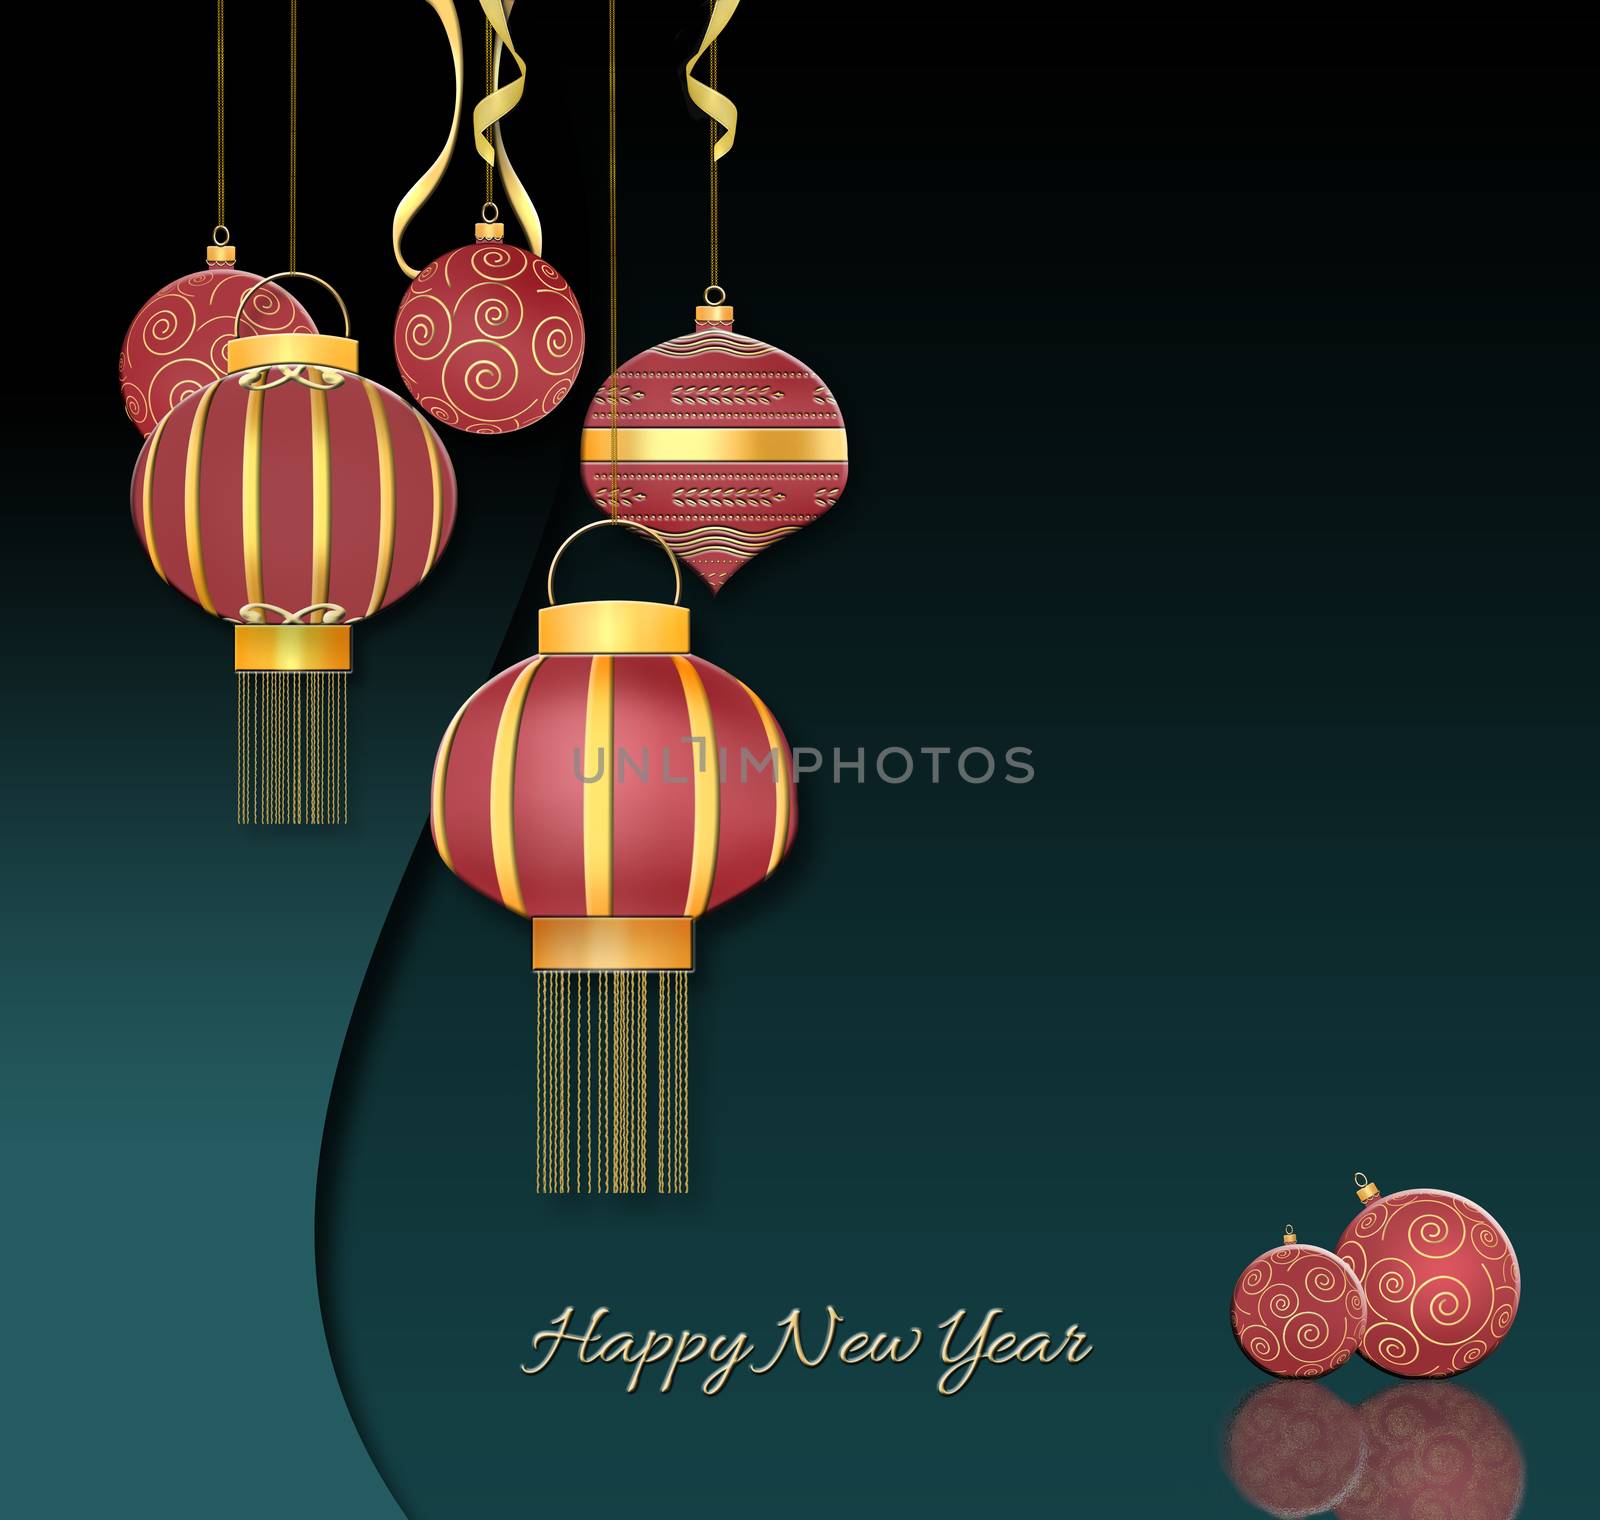 Red balls with gold ornament, Chinese style hanging red lanterns with confetti on dark green background. Chirstmas 2021 New Year card. Text Happy New Year. 3D illustration